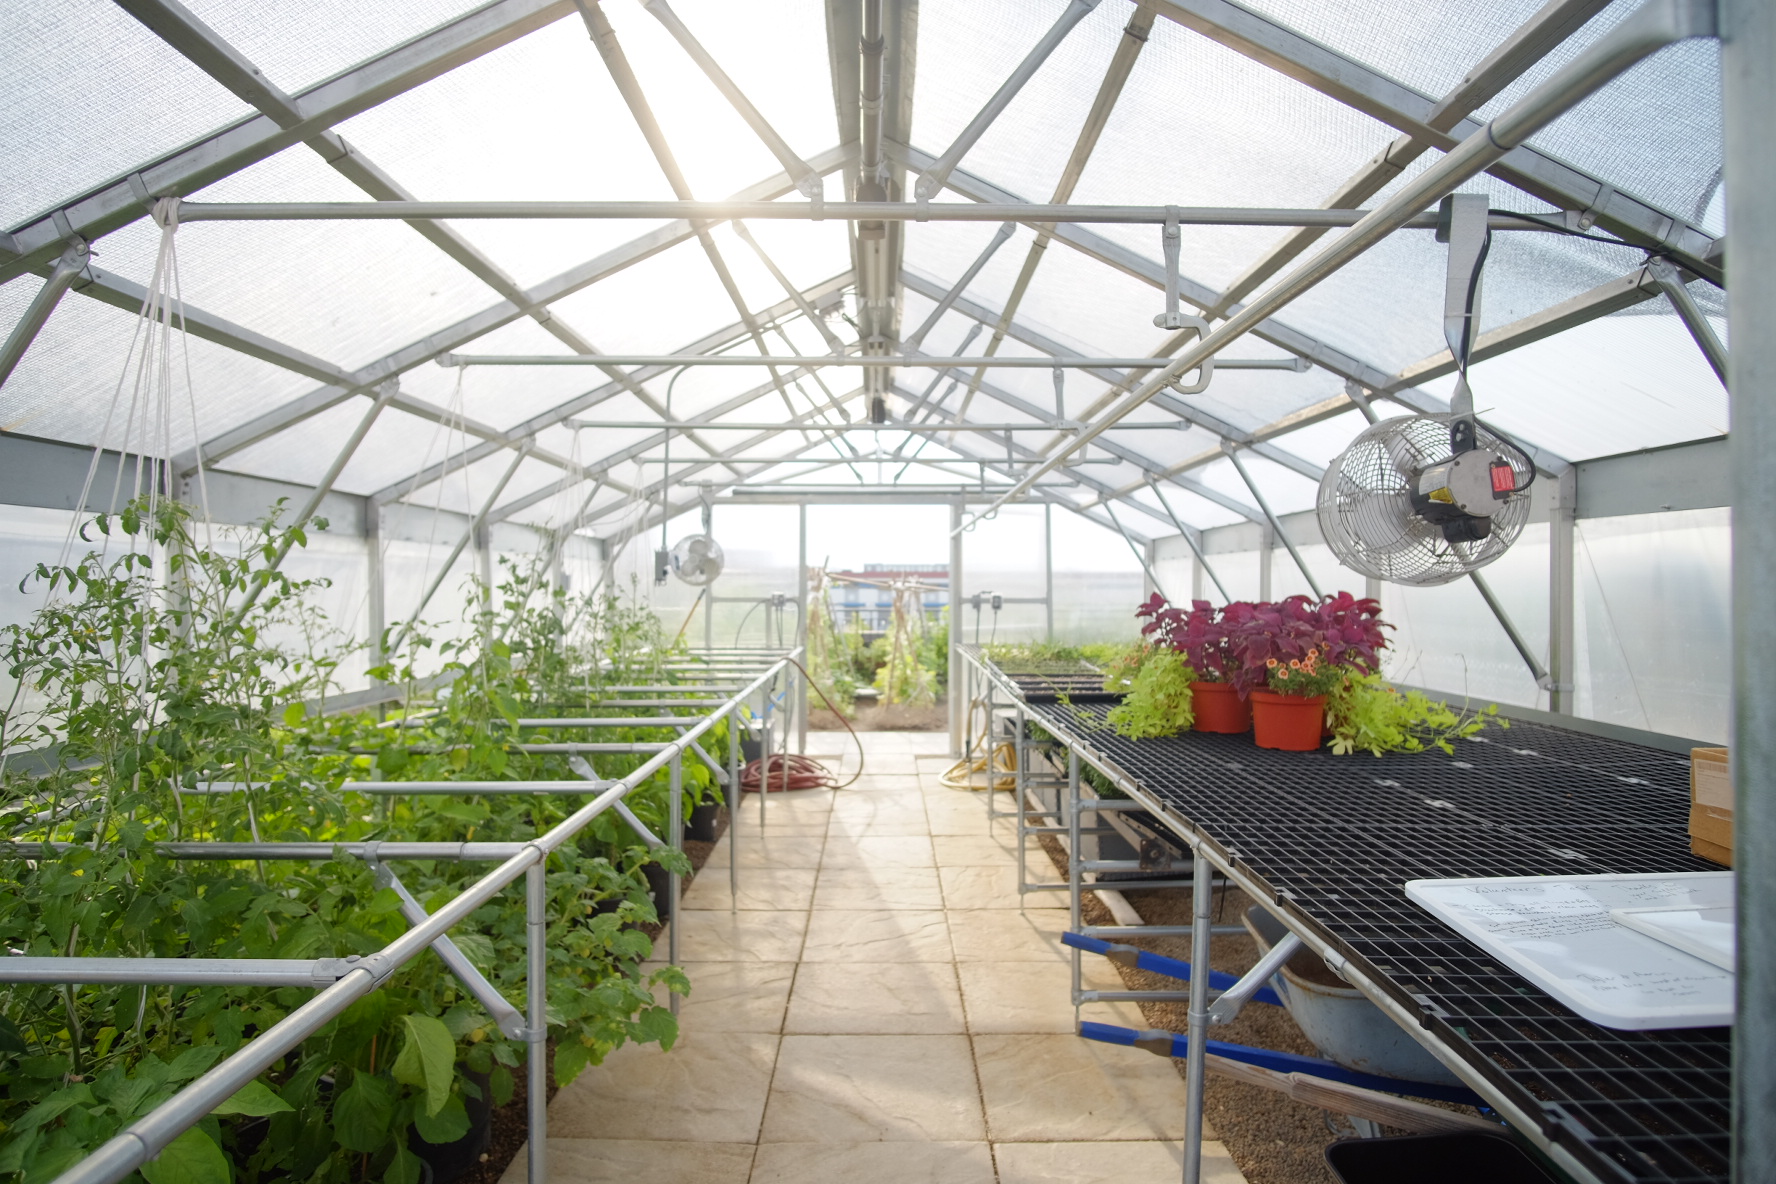 Copy of Inside greenhouse with tomato and tomatillo plants